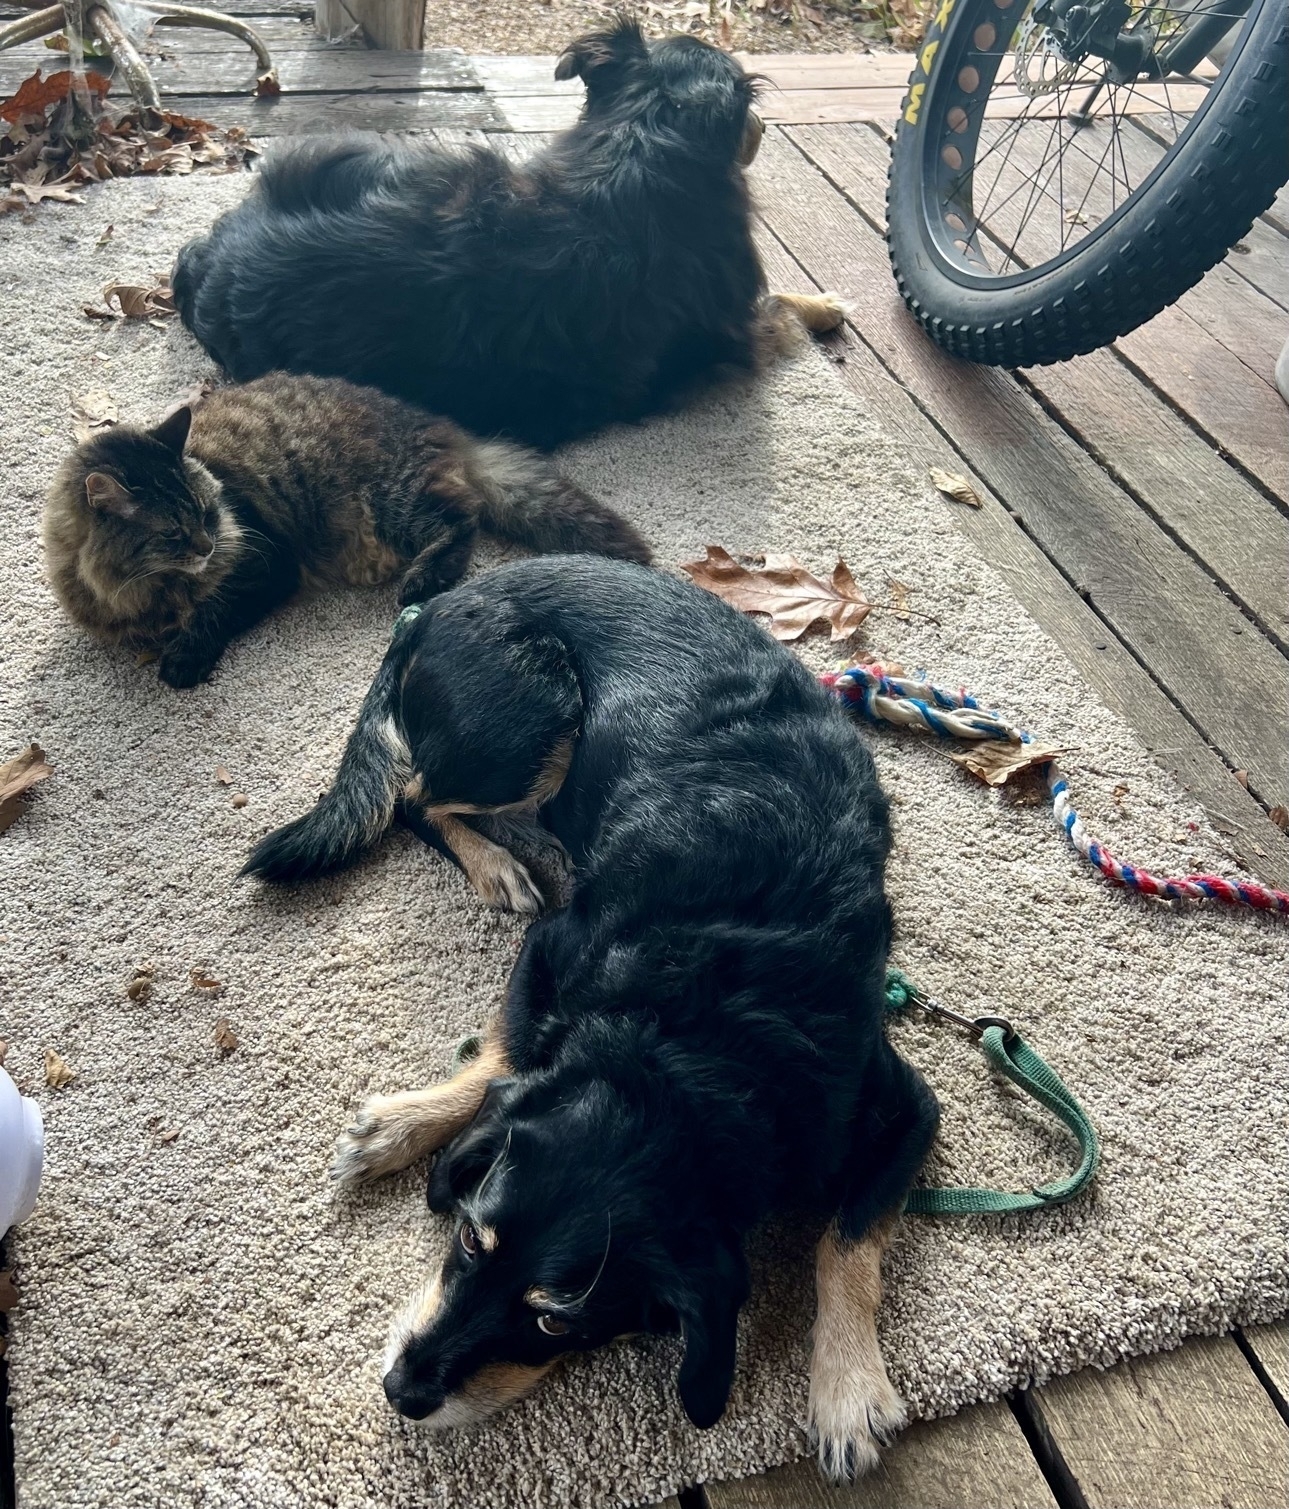 Two black dogs and a brown cat lay on beige colored carpeting on a porch. The dog closest to the photographer is looking at the camera